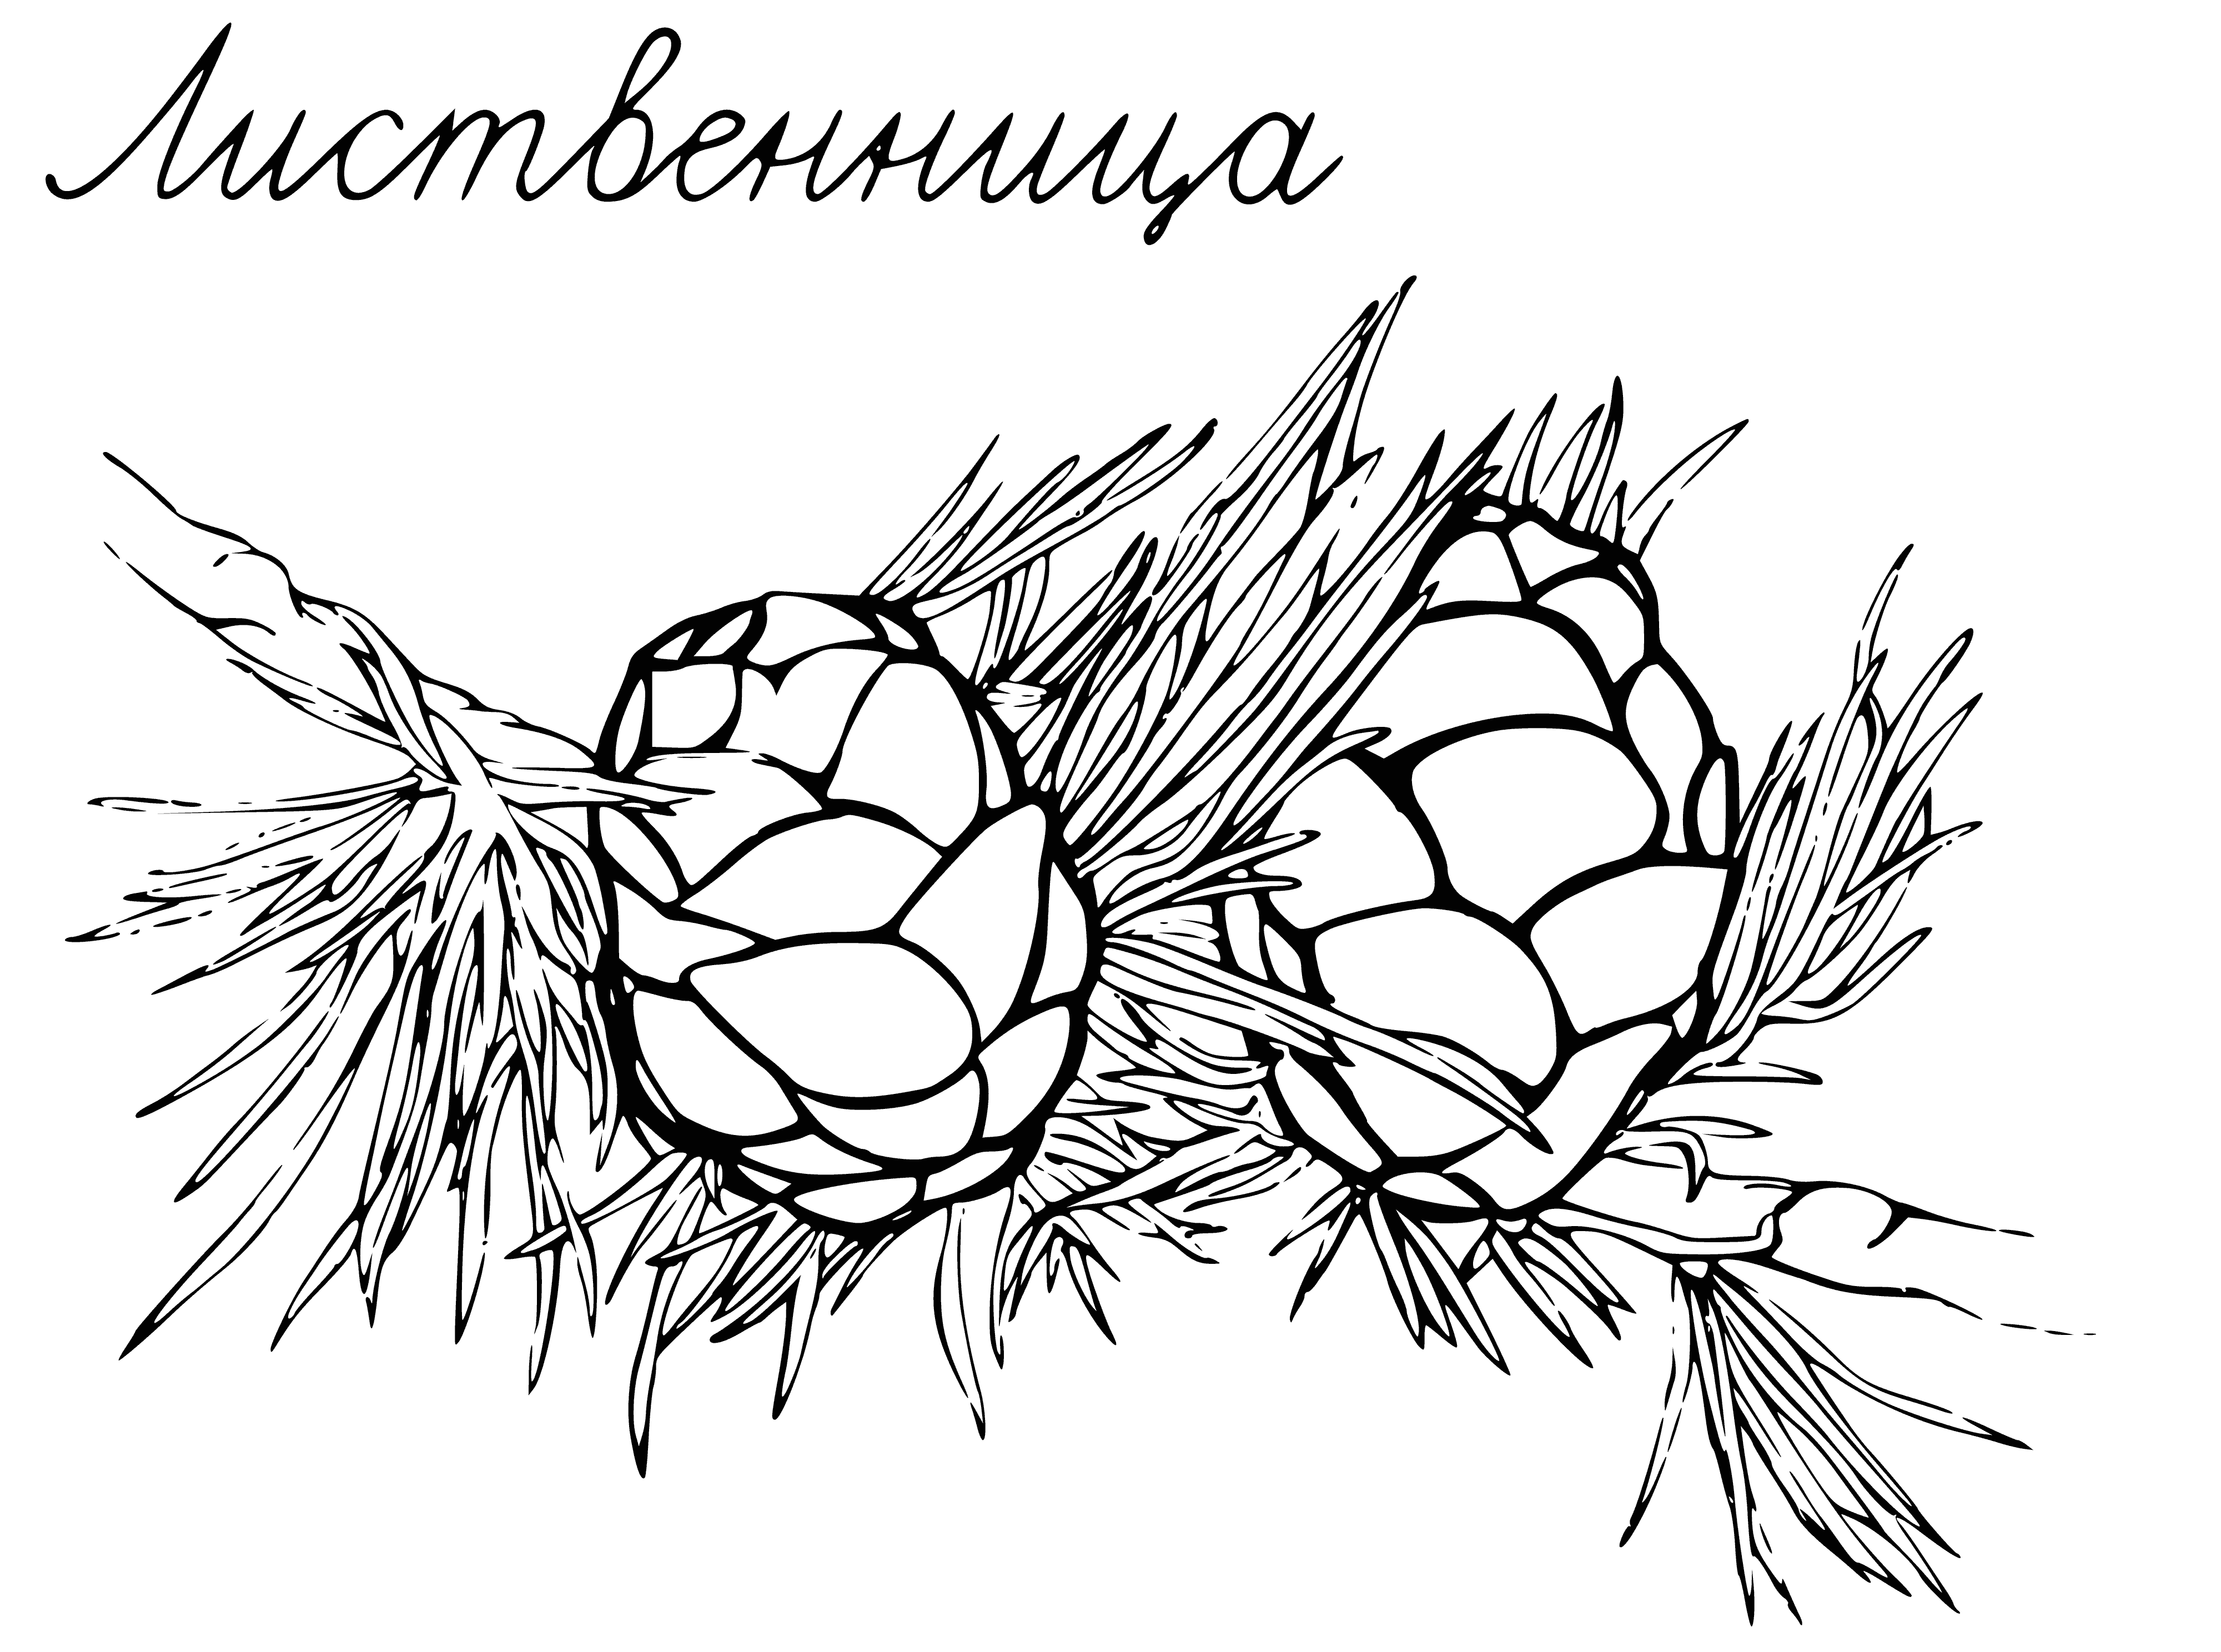 coloring page: The Larch tree's thin, clustered leaves & small, round, hard-shelled fruits make it unique.